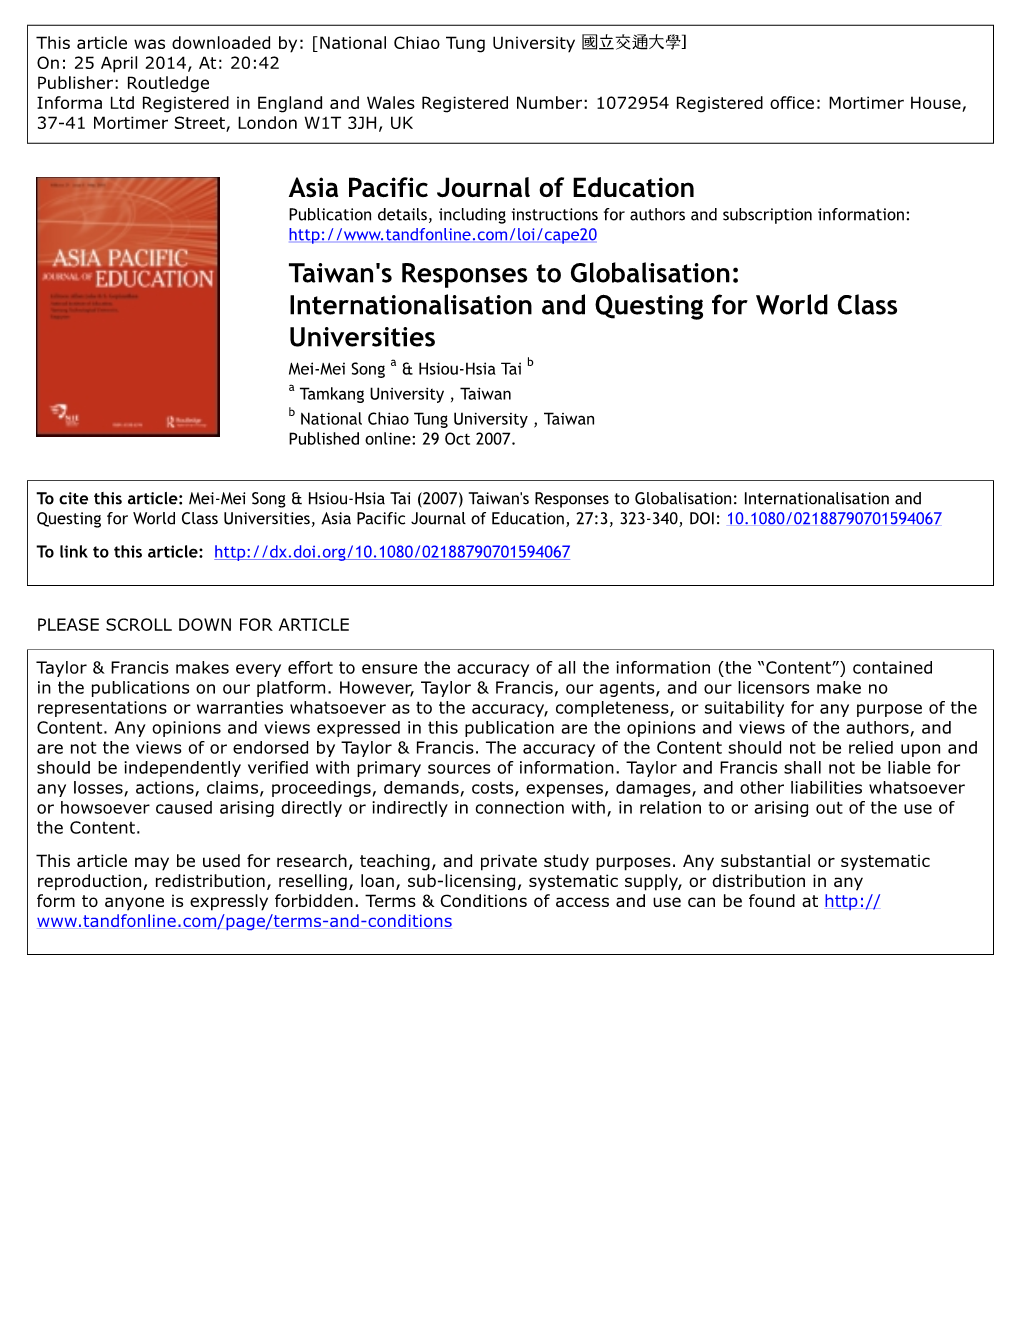 Asia Pacific Journal of Education Taiwan's Responses to Globalisation